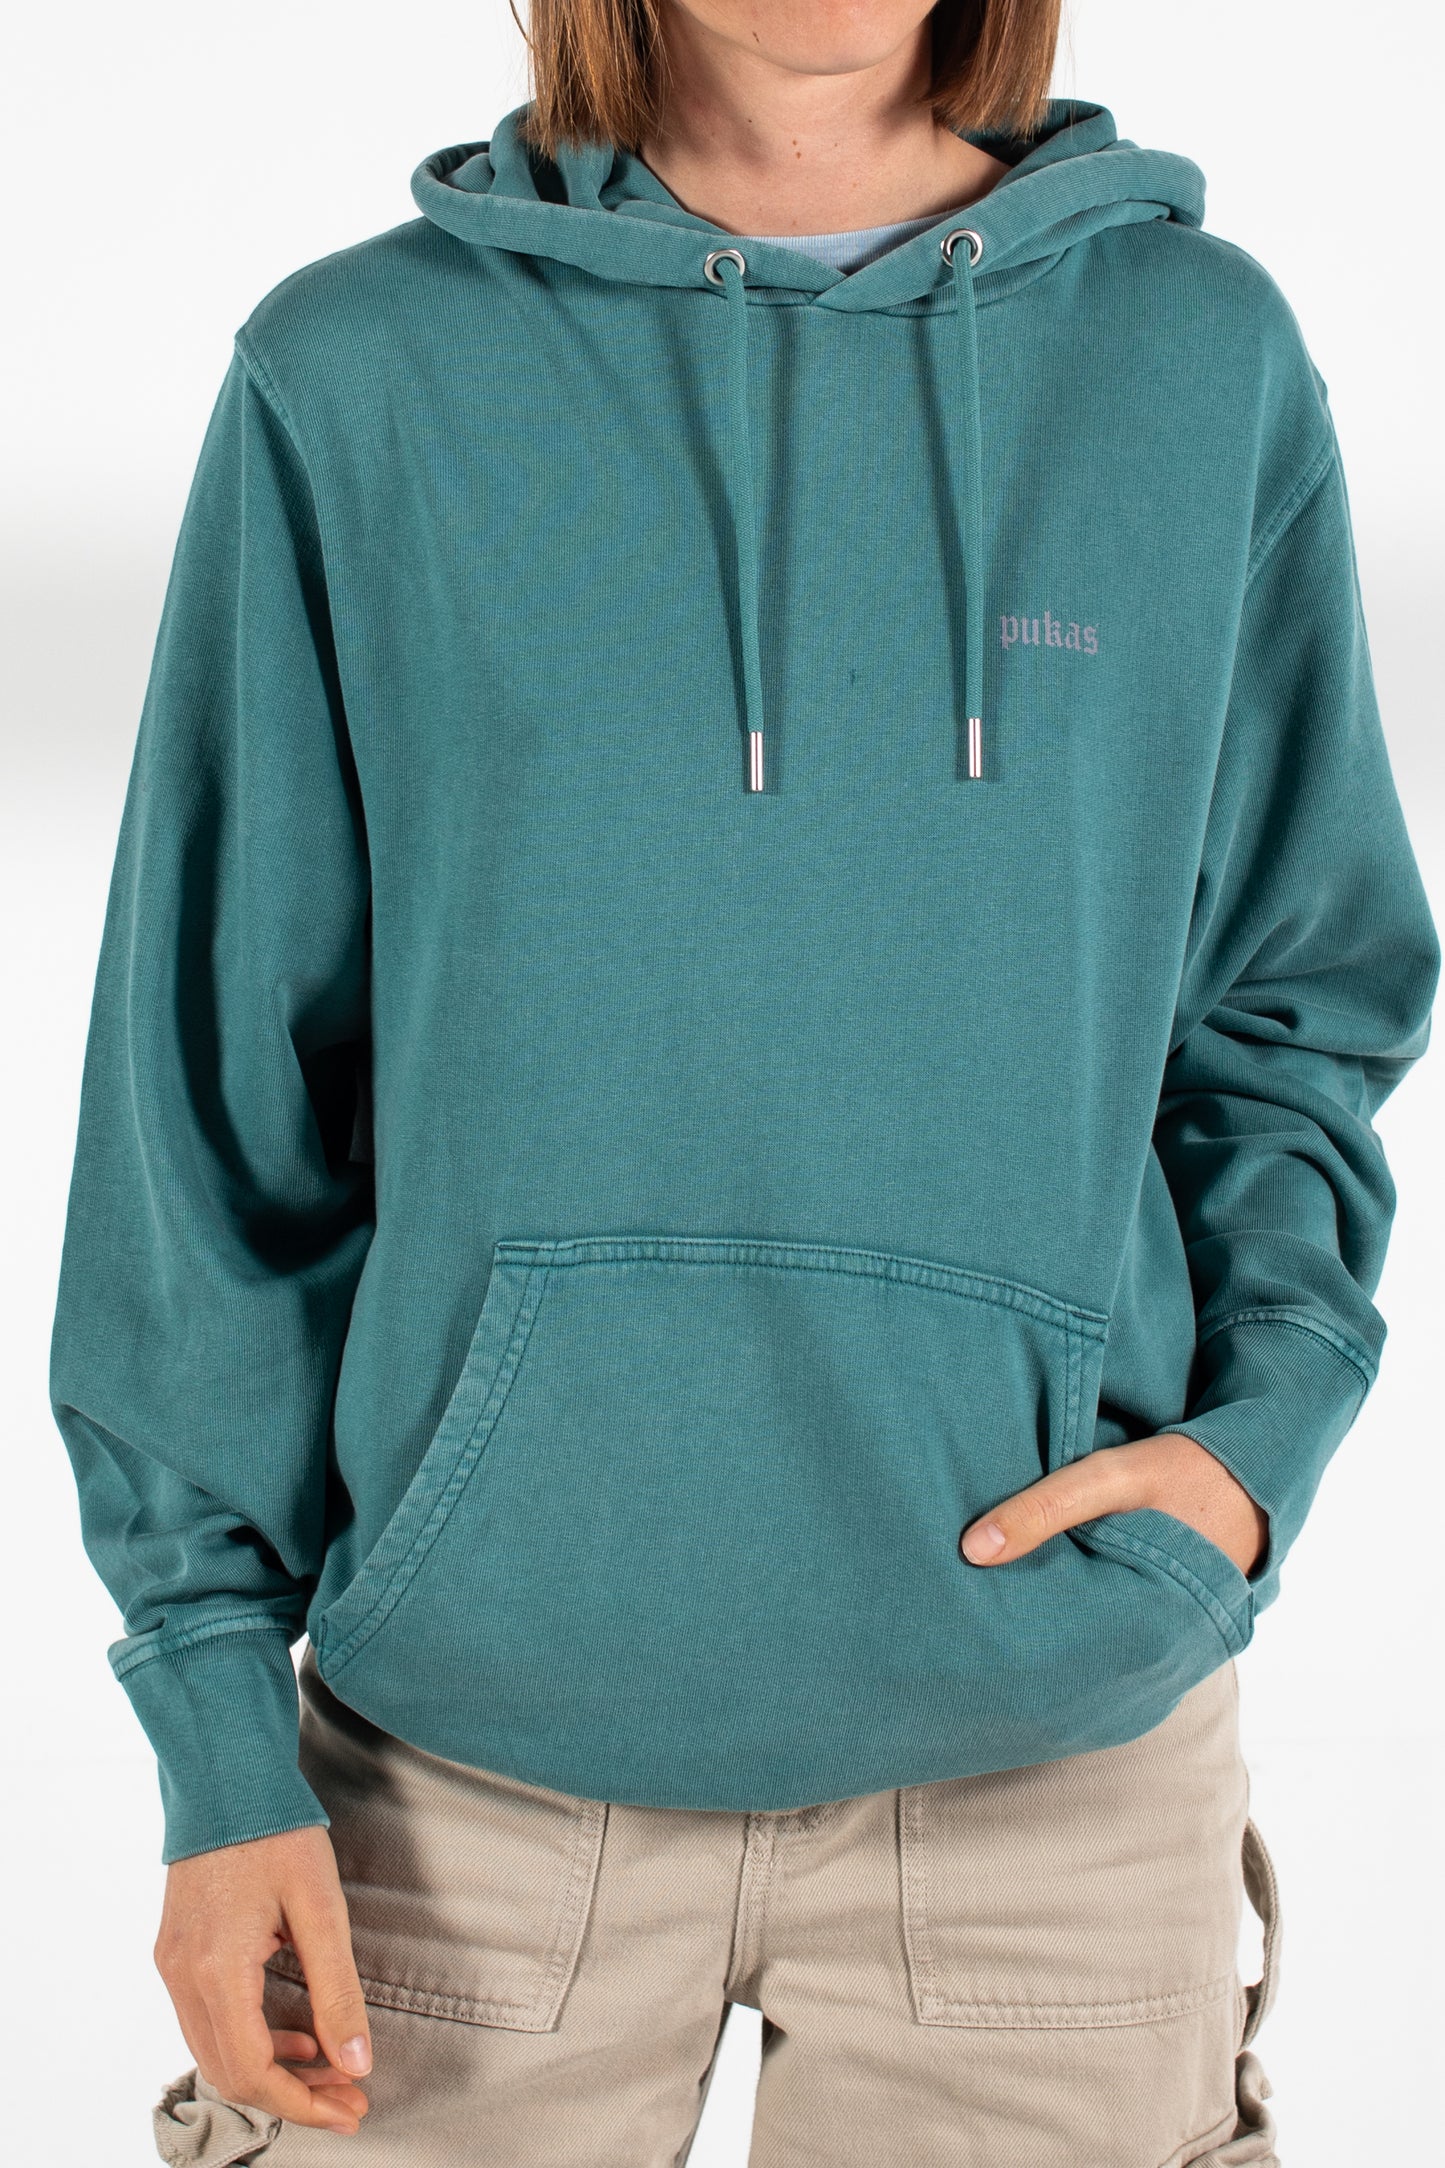 Pukas-Surf-Shop-more-surfing-sweater-dyed-hydro